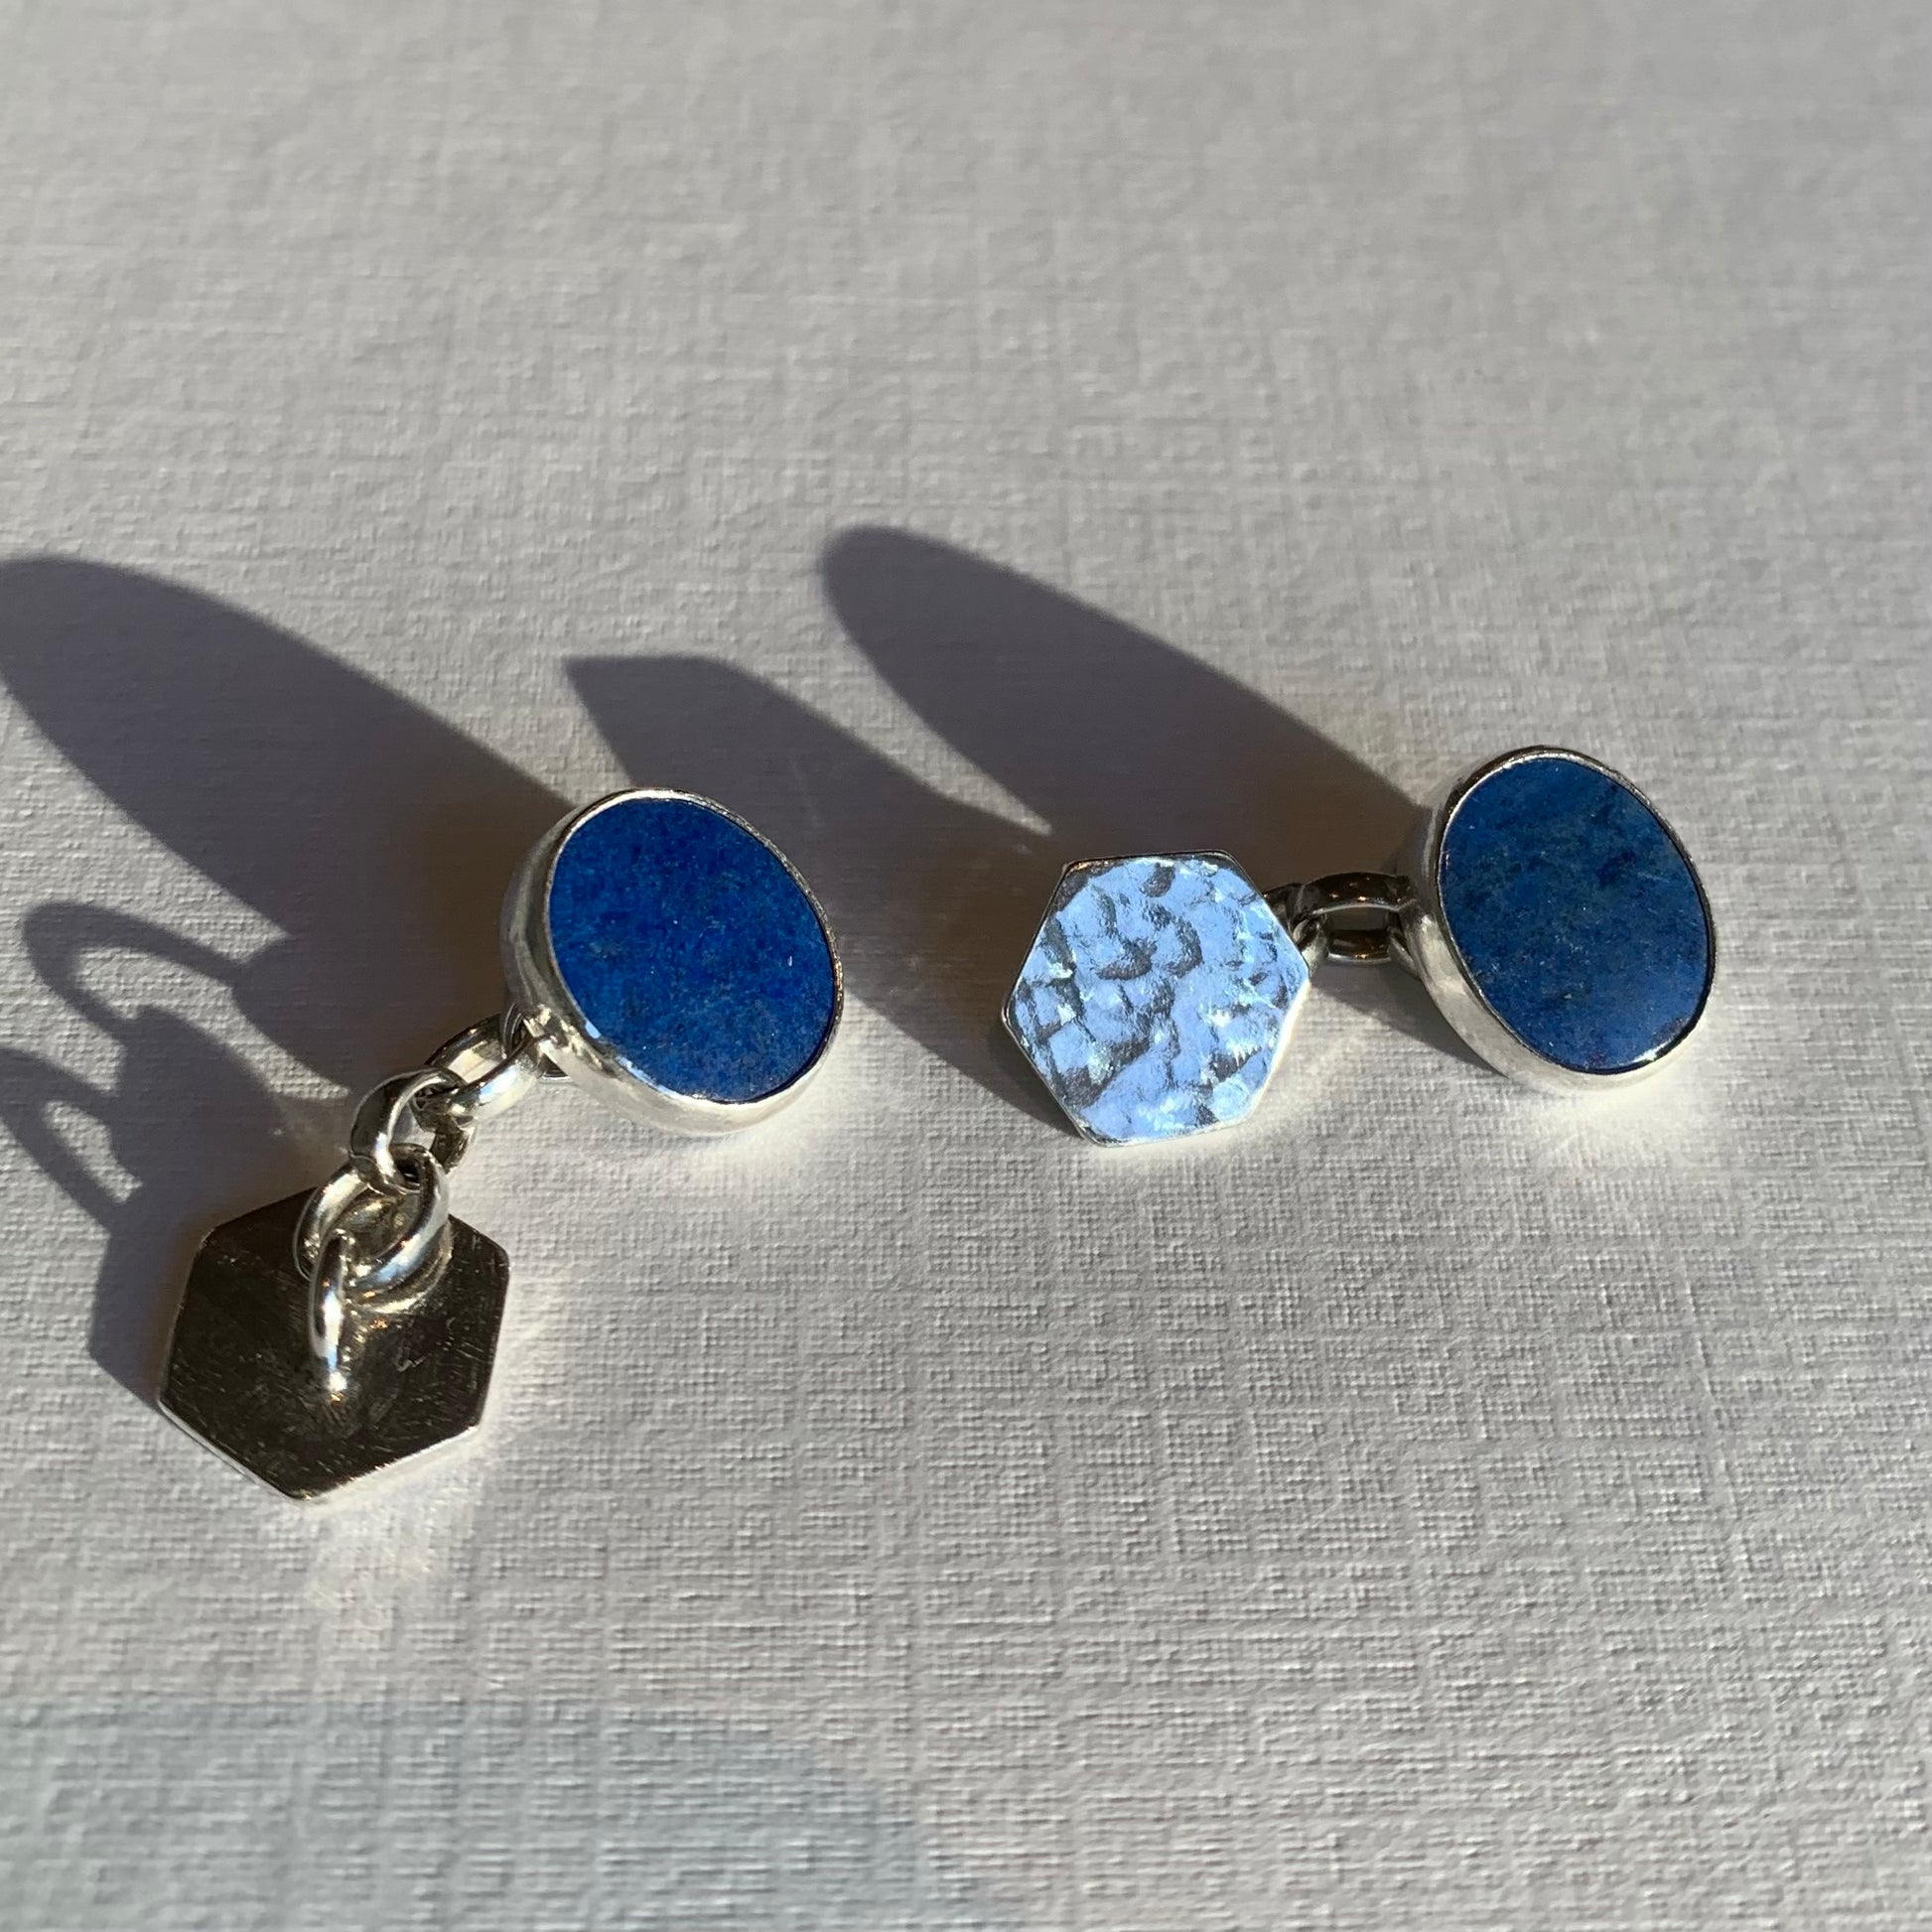 Lapis lazuli and hexagonal sterling silver personalised cufflinks.